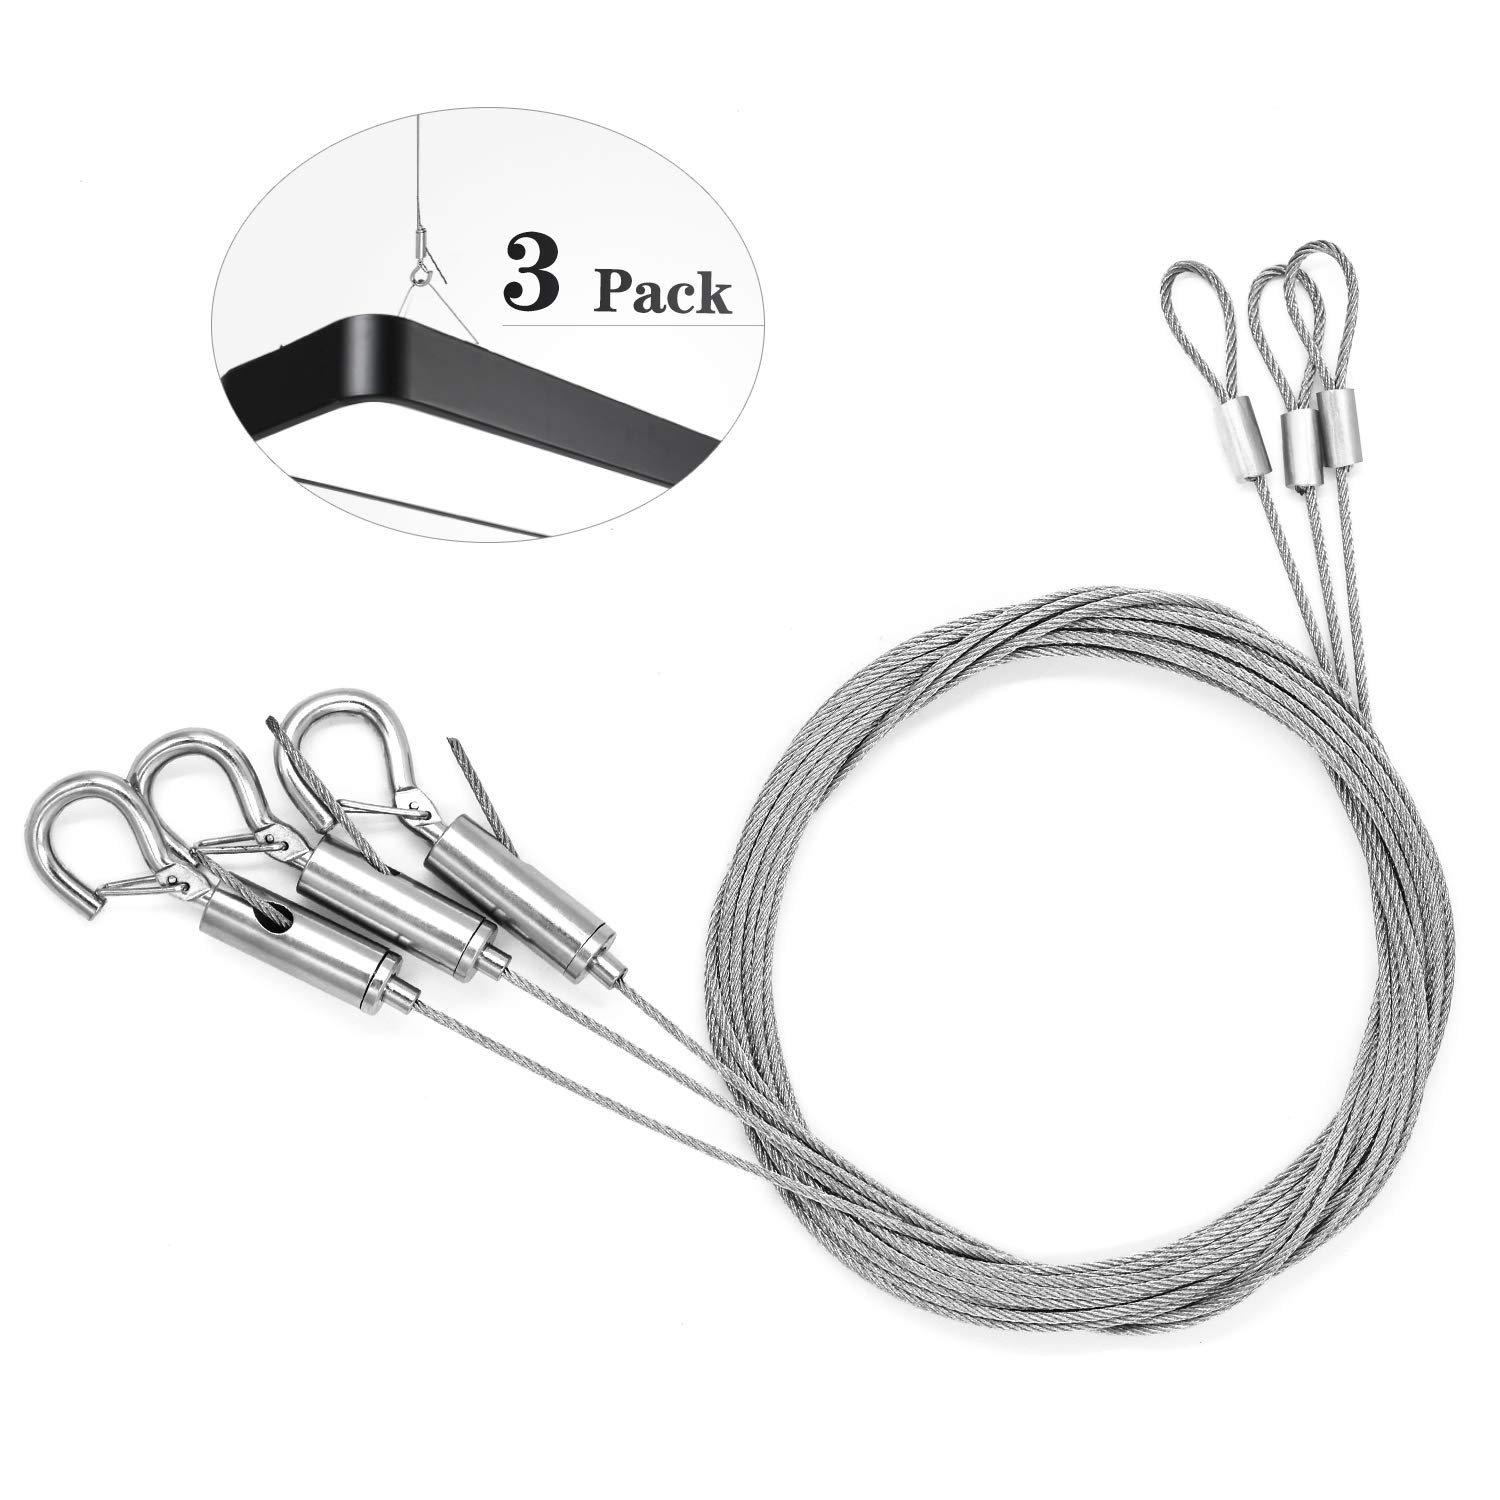 3 Pcs Heavy Duty Stainless Steel Hanging Wire 1.5 mm x 2 m Adjustable  Length Picture Hanging Rope for Mirror Light Lamp Billboard – BigaMart